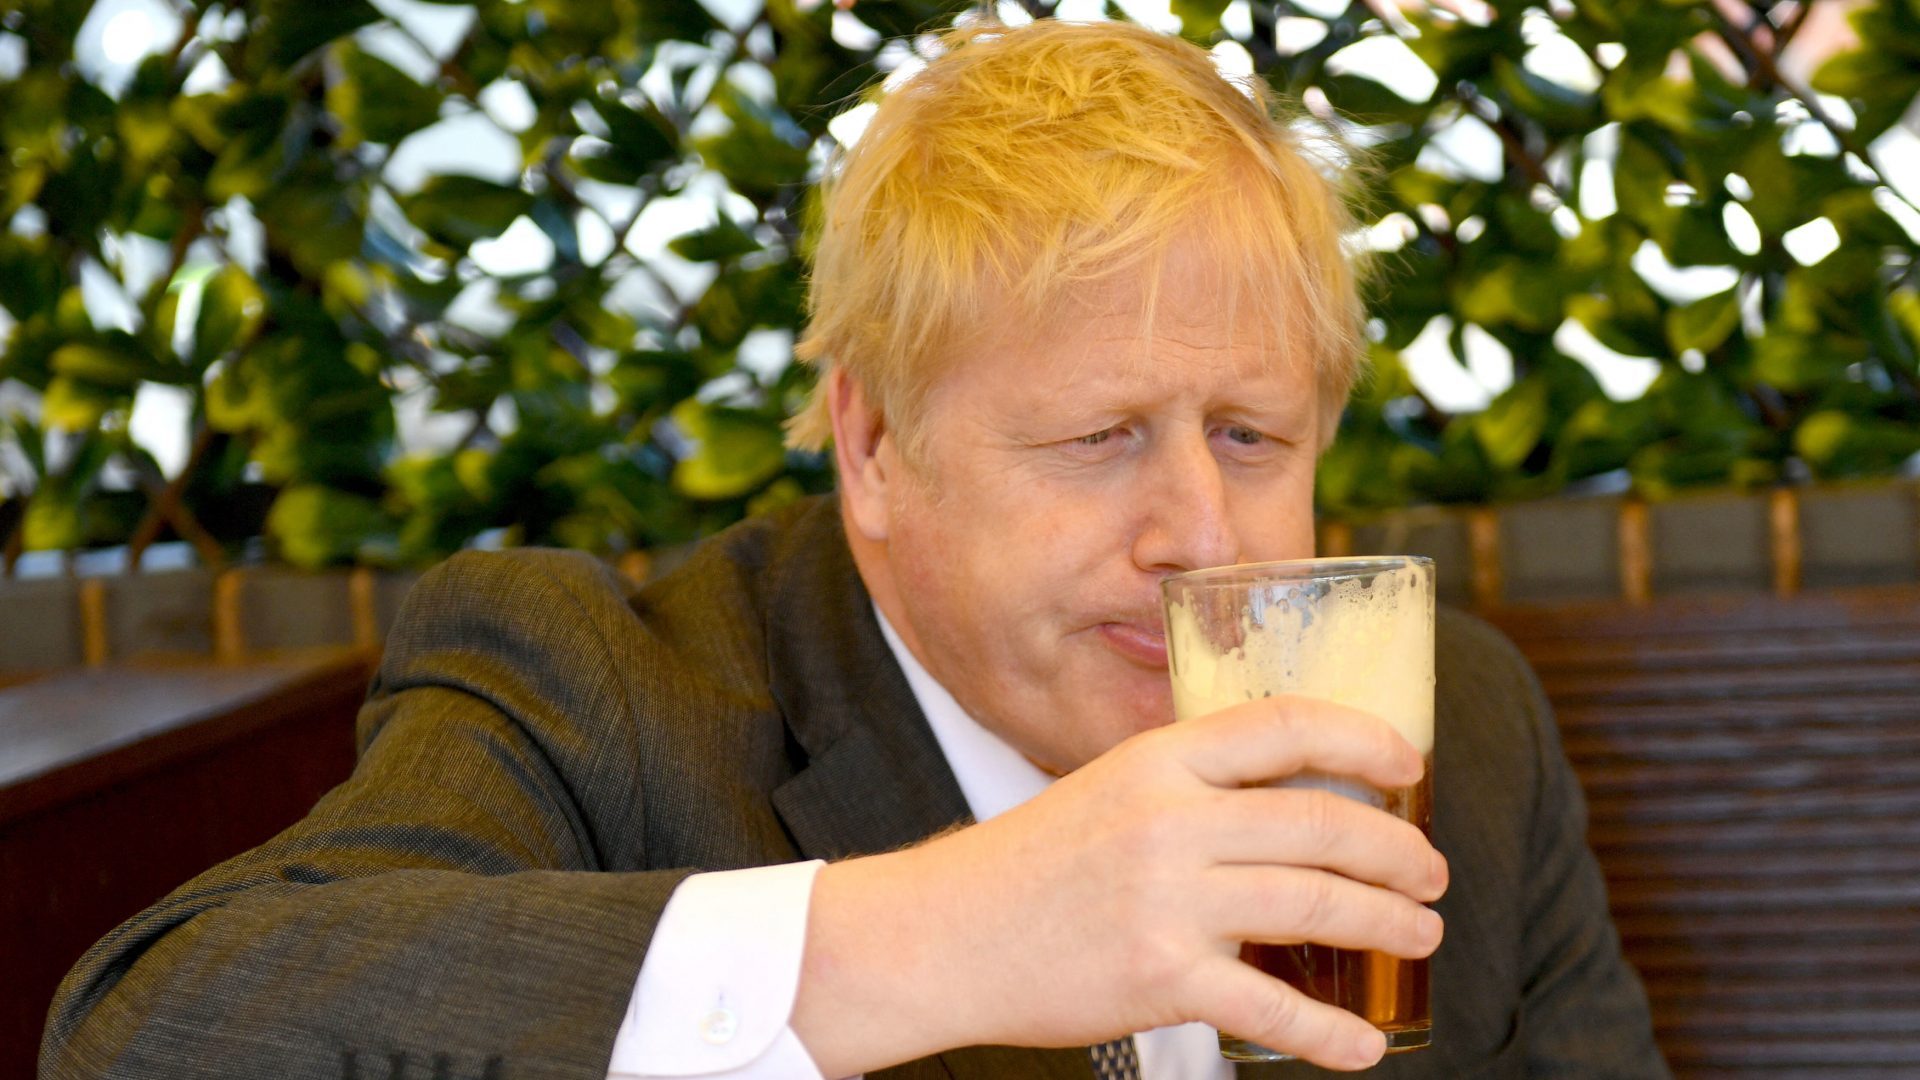 Boris Johnson enjoys another drink while at work – in this case, during campaigning for the local elections in April 2021. Photo: Jacob King/Getty